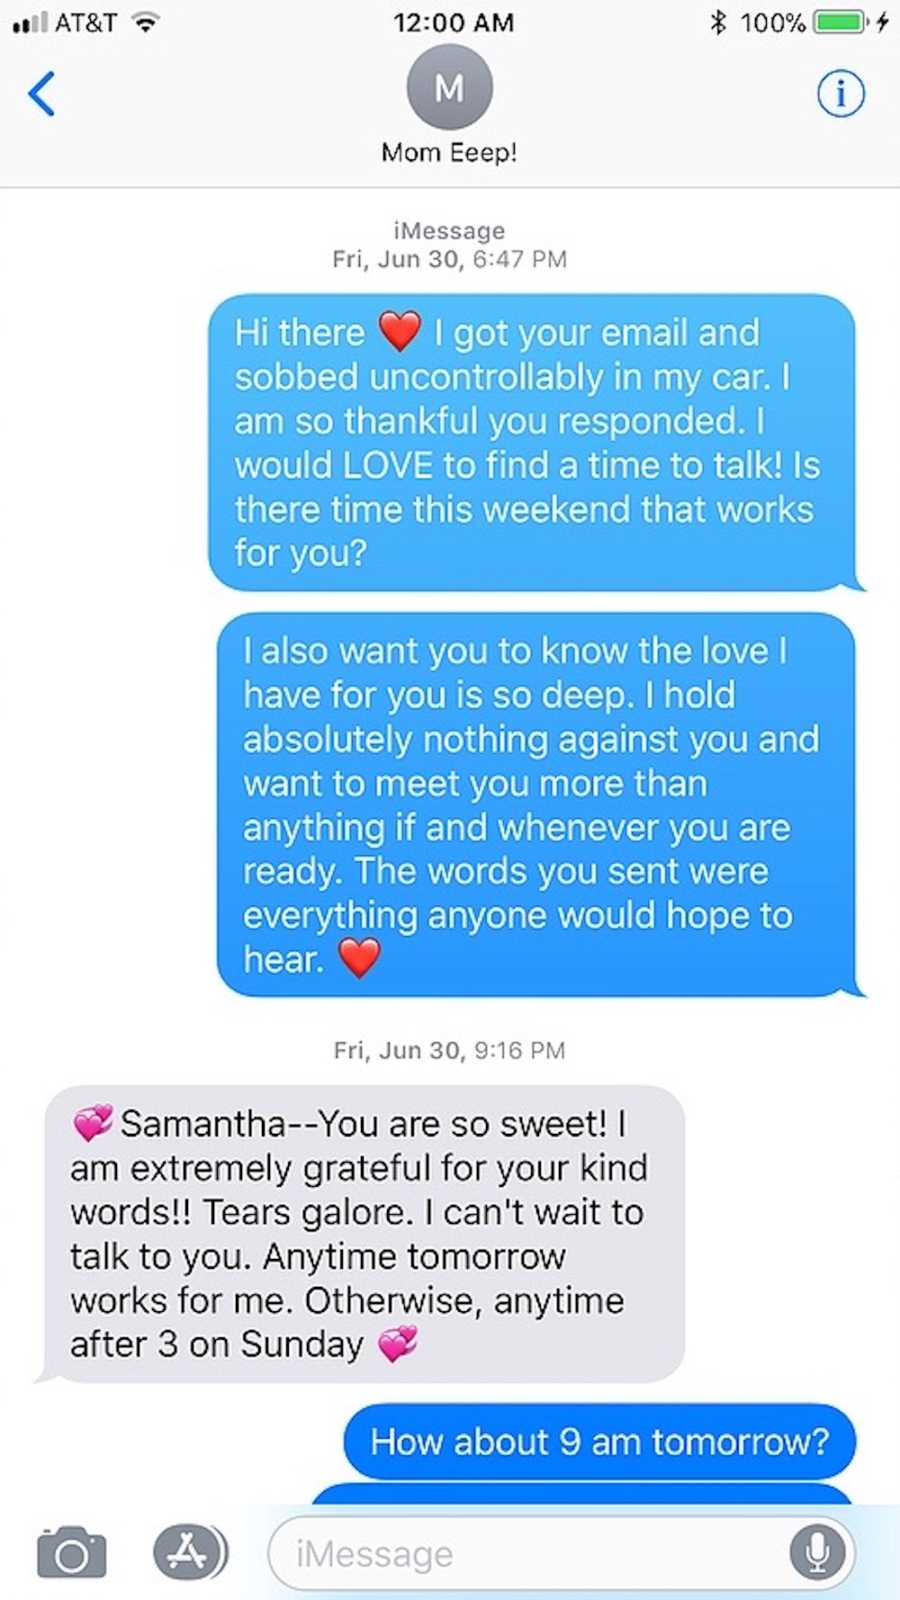 Screenshot of iMessage between woman and her birth mother she tracked down